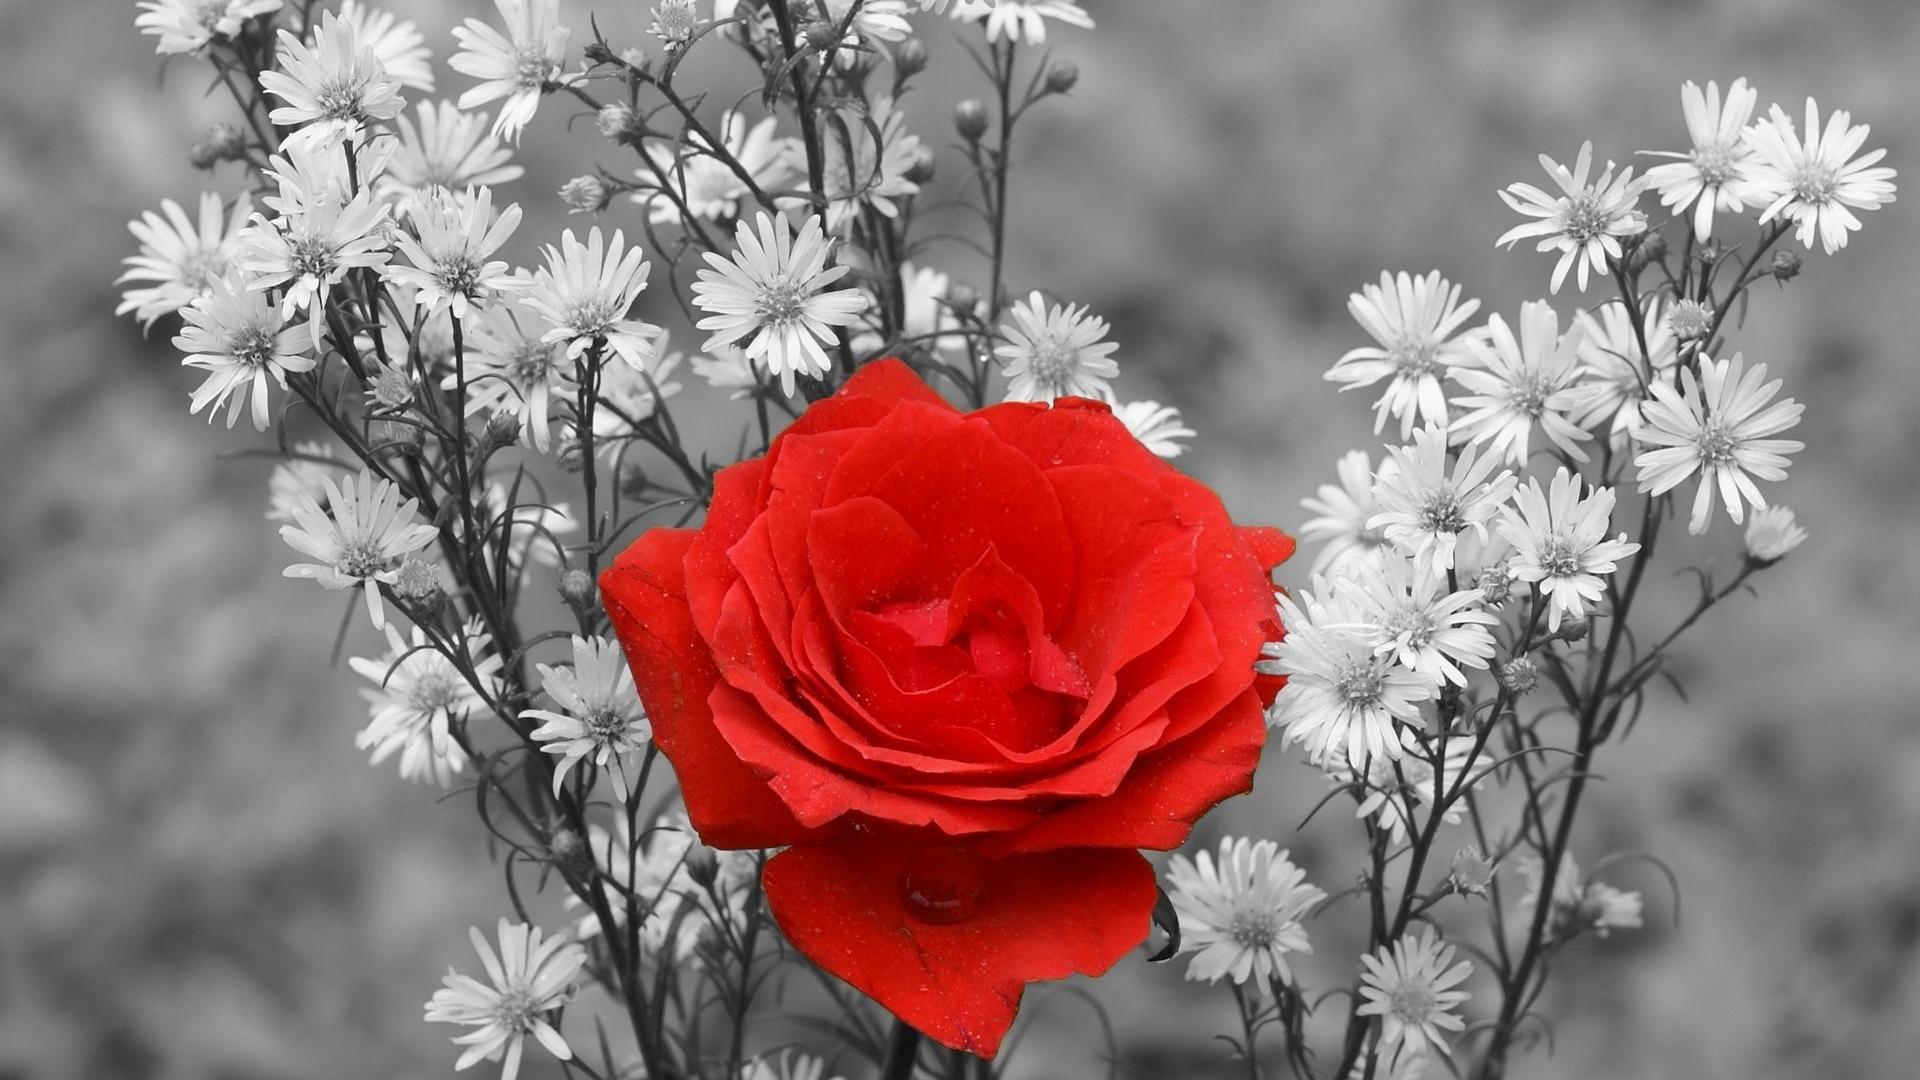 Gallery for - red white and black flower wallpaper